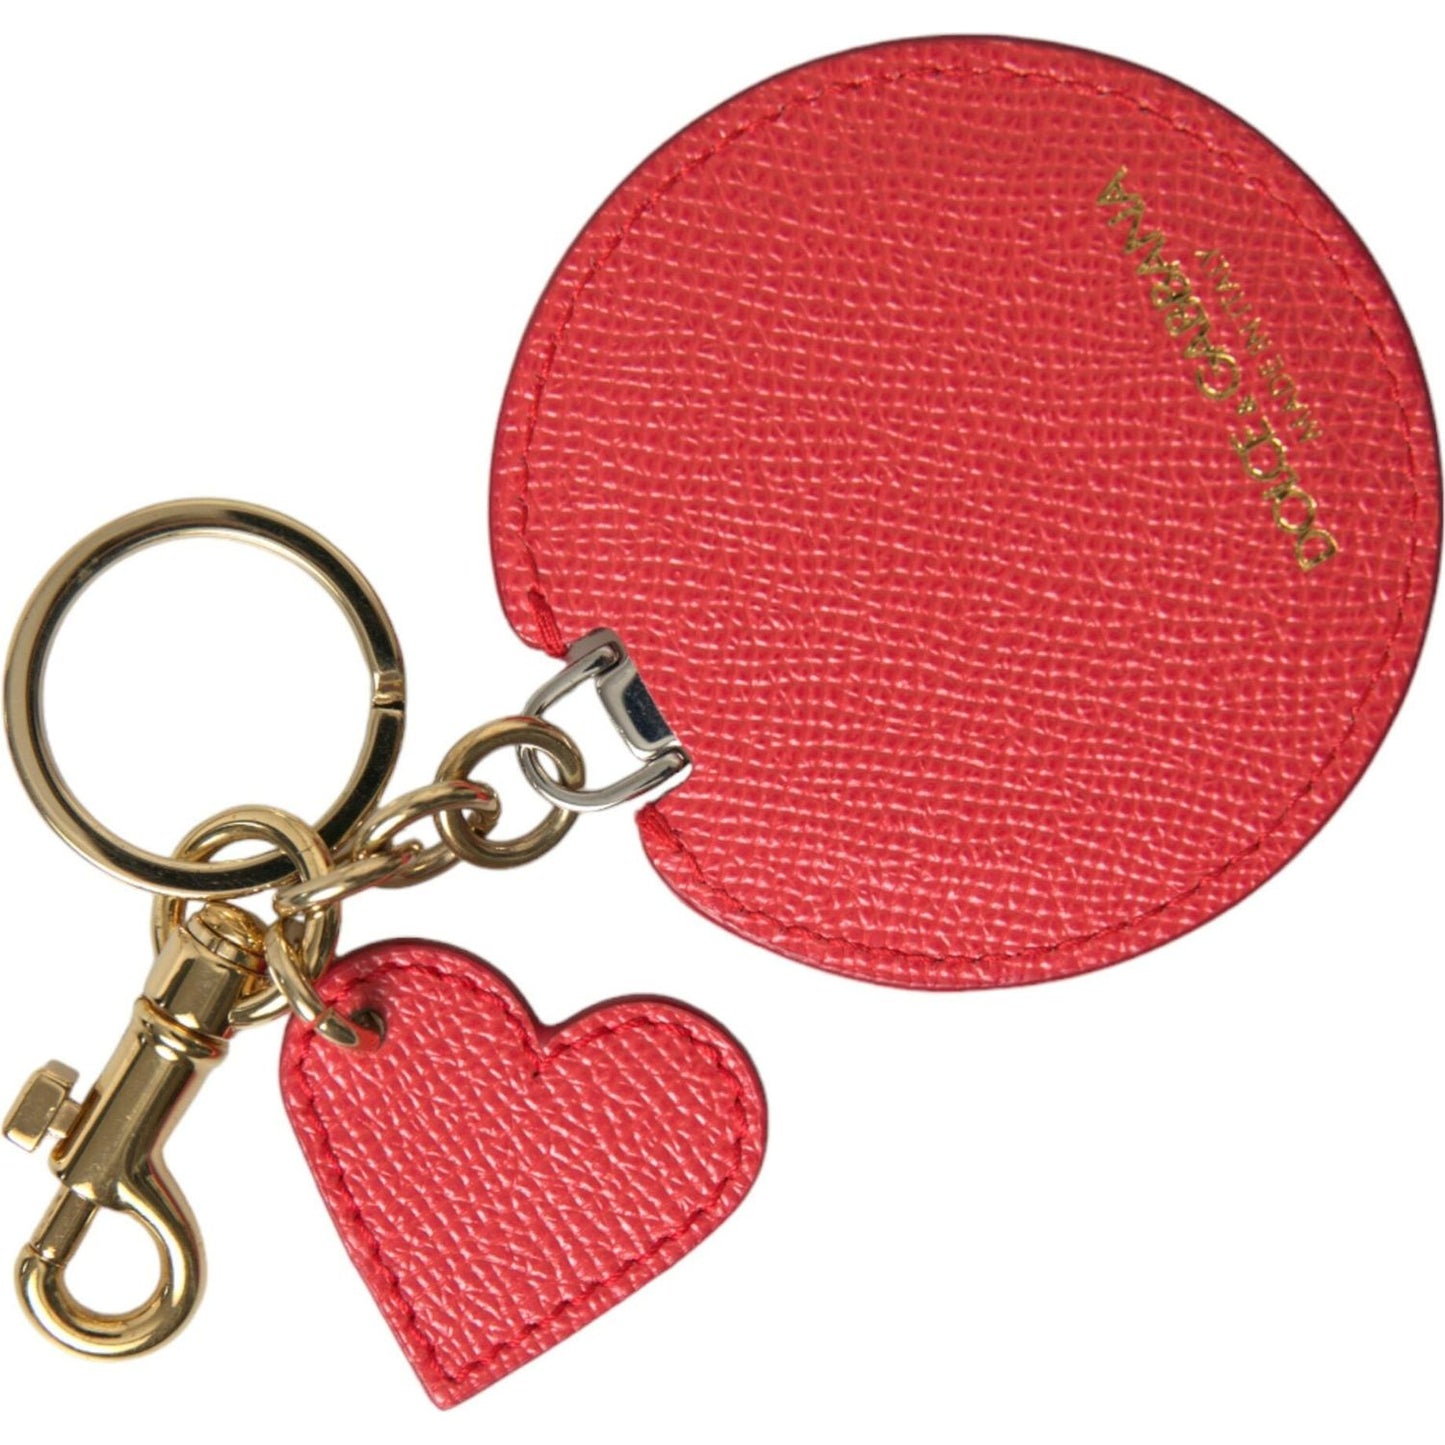 Dolce & Gabbana | Elegant Red Leather Keychain with Gold Accents| McRichard Designer Brands   